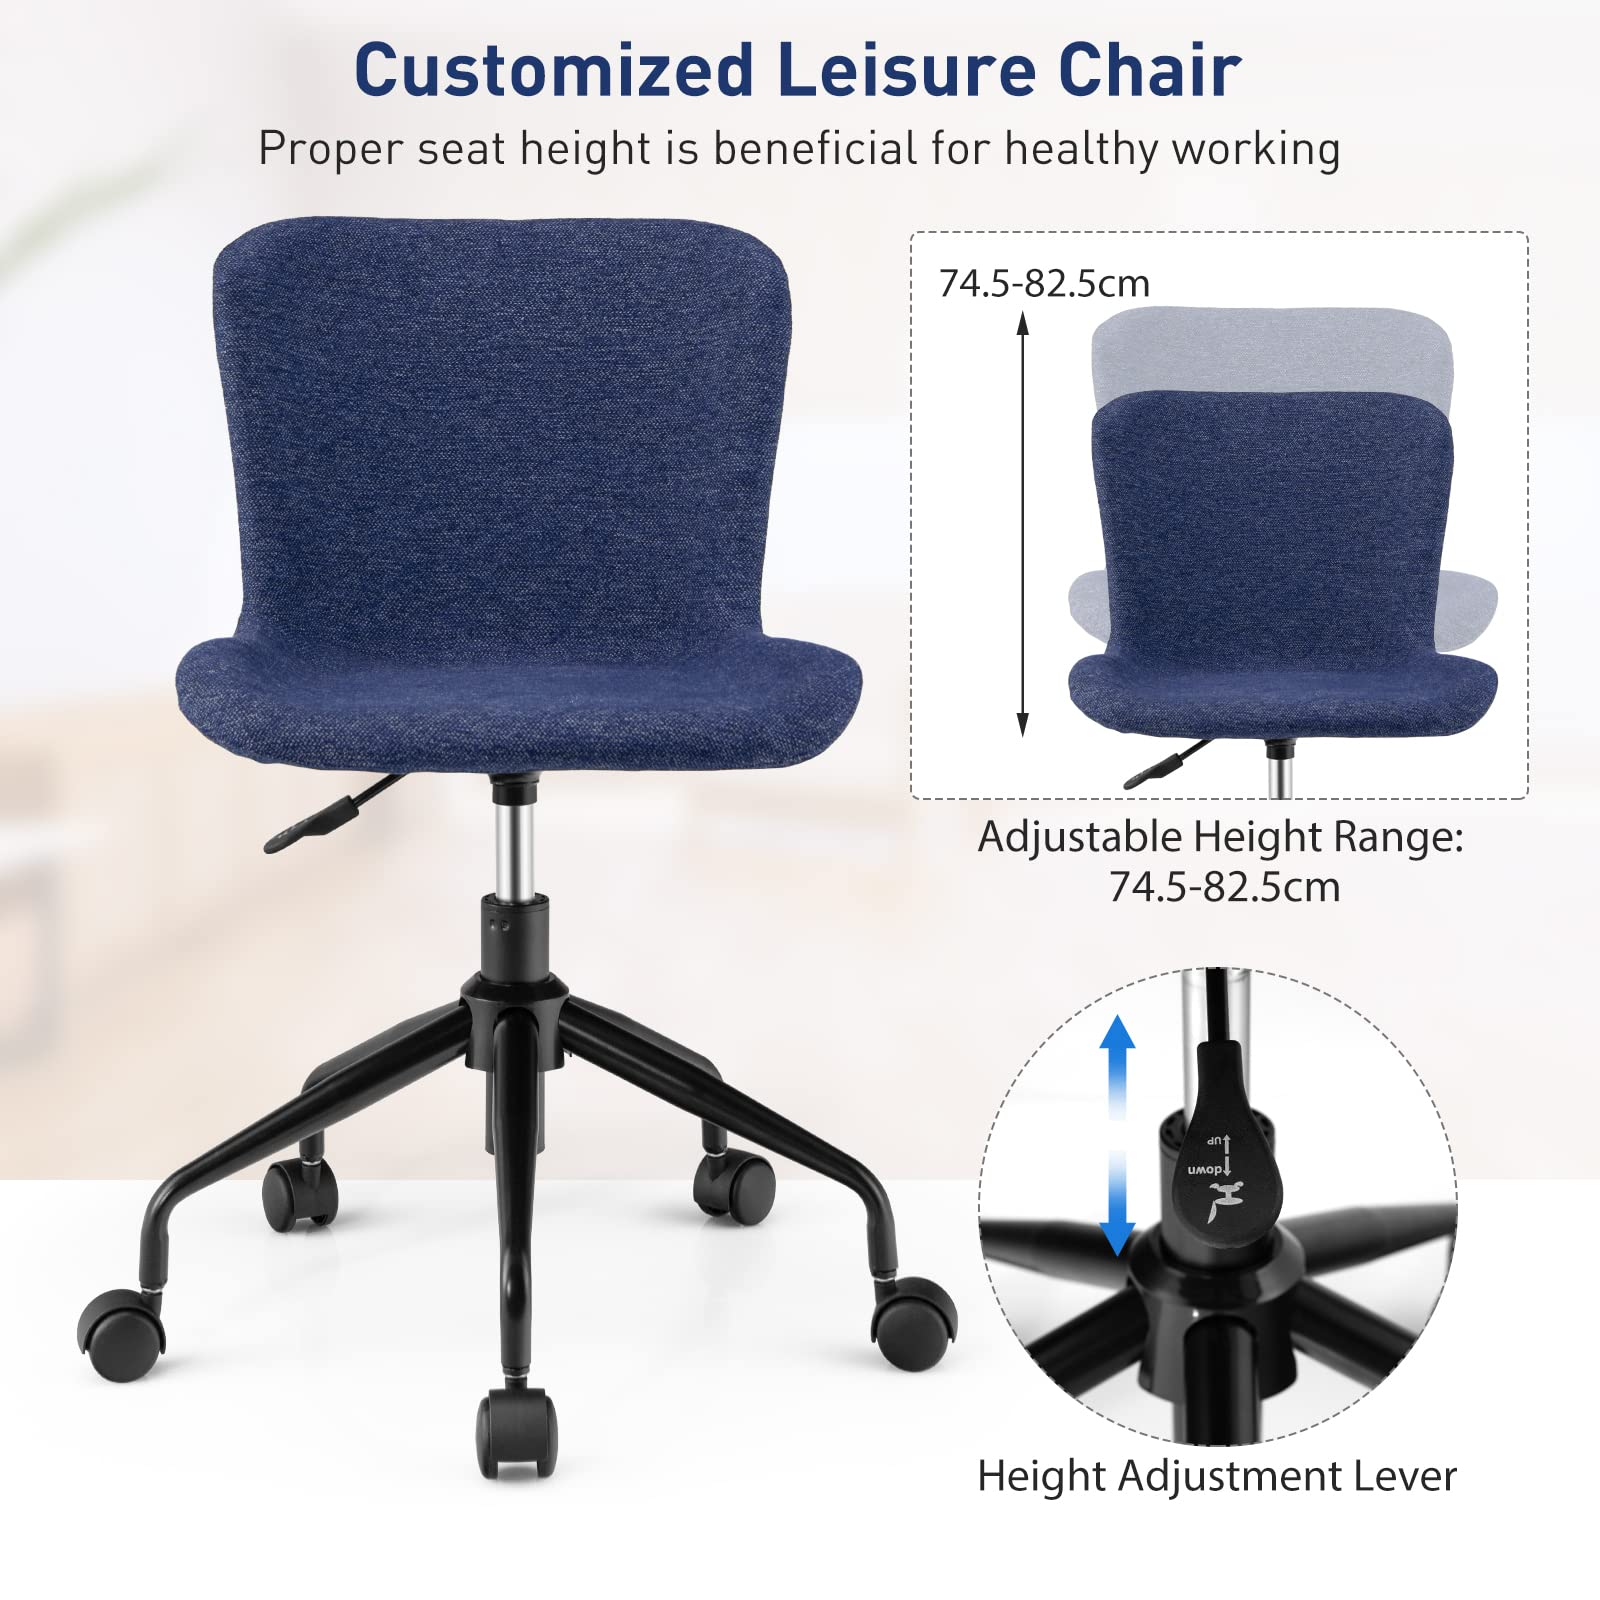 Giantex Home Office Chair with Wheels, Mid-Back Swivel Computer Chair Rolling Adjustable Linen Leisure Chair